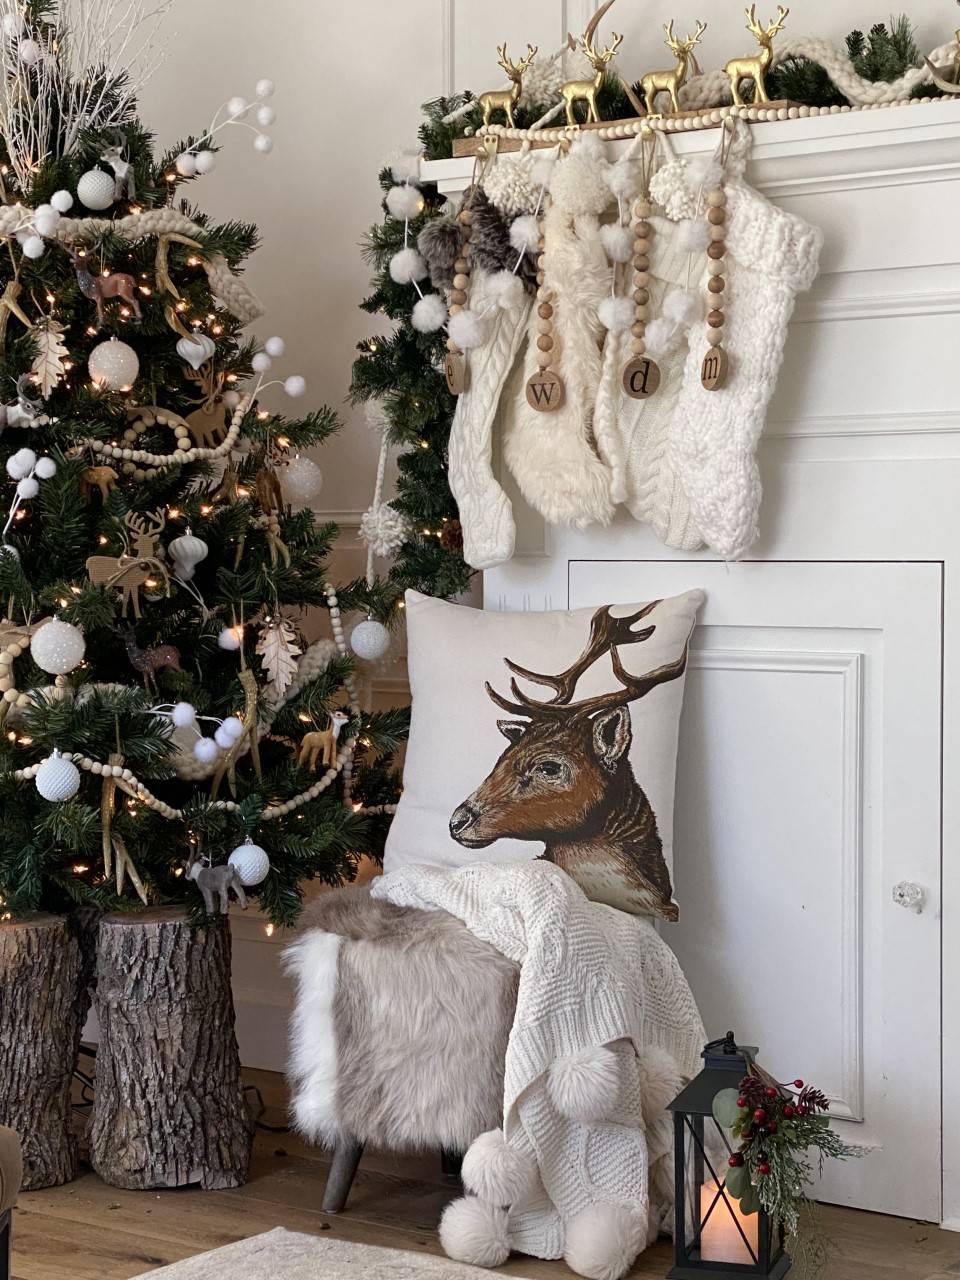 Creative Ways to Decorate with Christmas Tree Branches